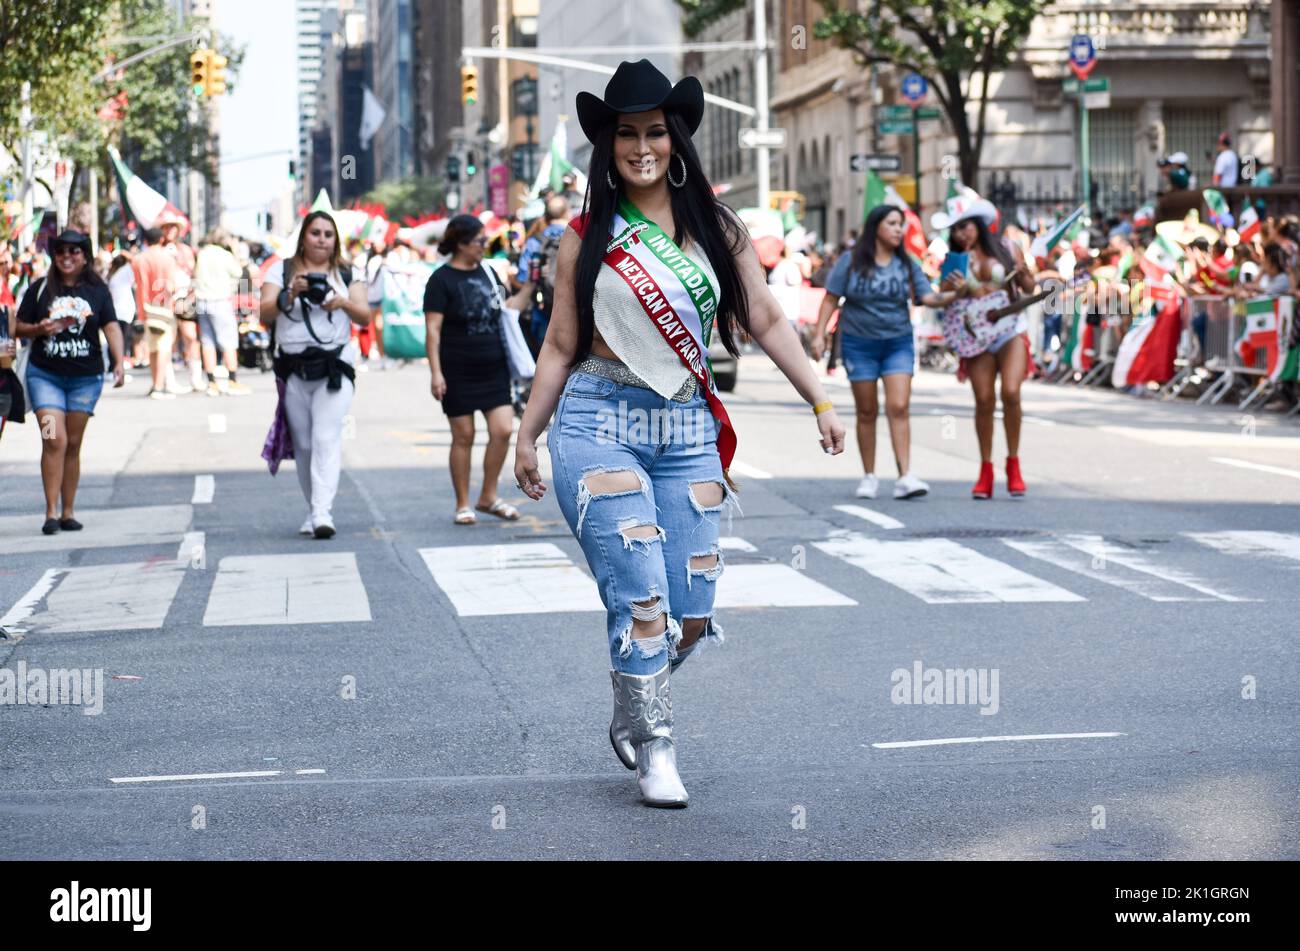 A parade participant is seen walking at the annual Mexican Day Parade along Madison Avenue in New York City. Credit: Ryan Rahman/Alamy Live News. Stock Photo